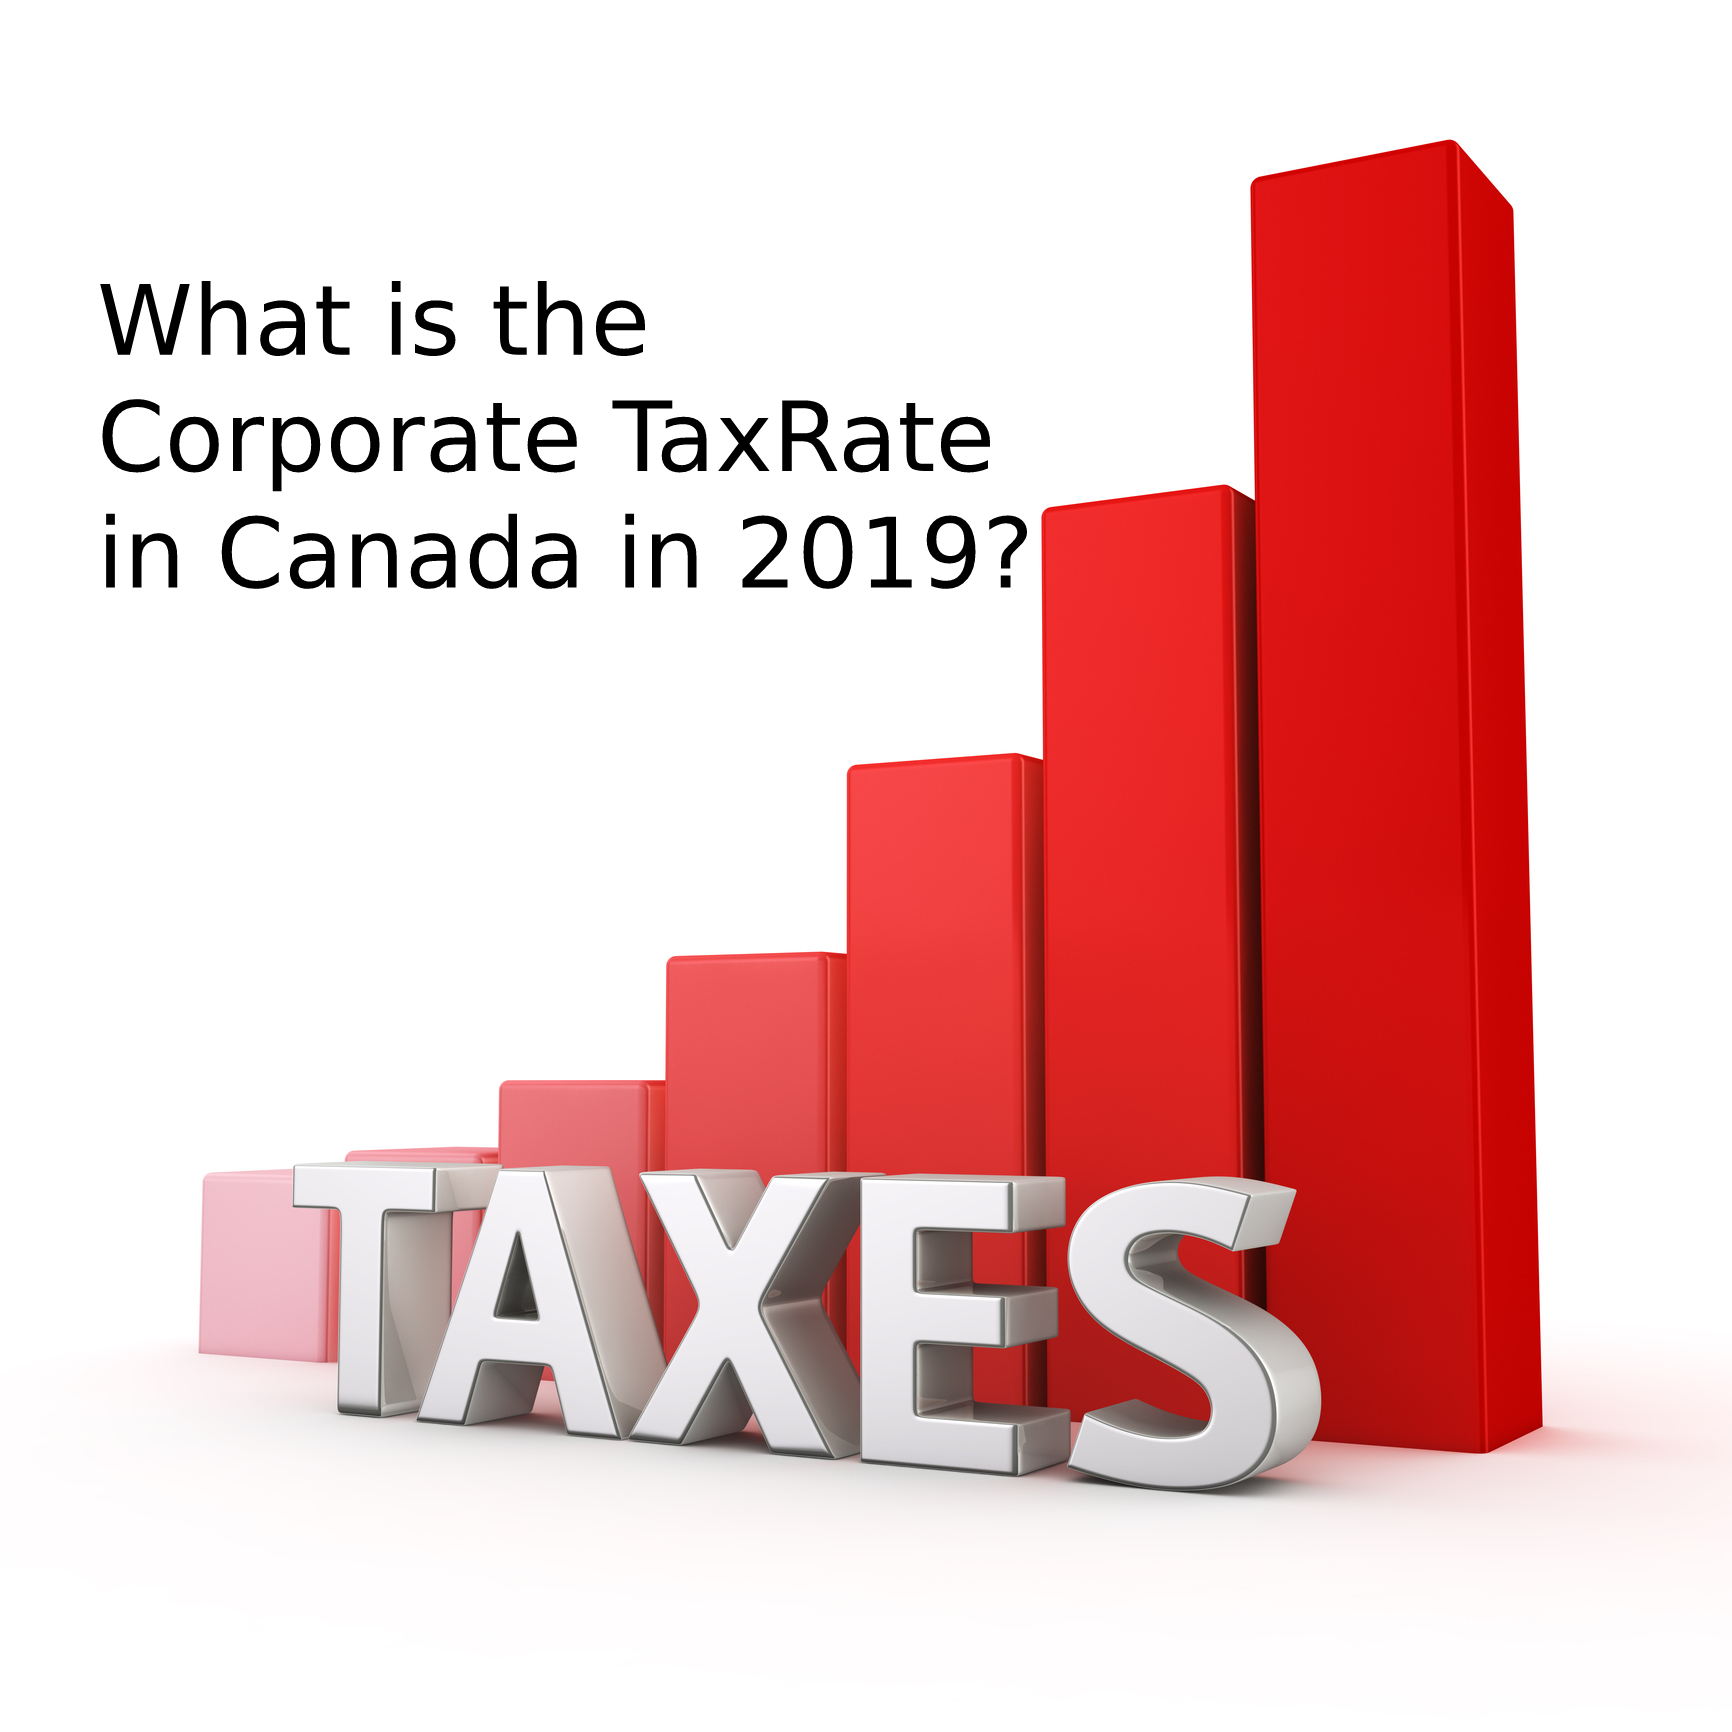 What is the Corporate Tax Rate in Canada in 2019?